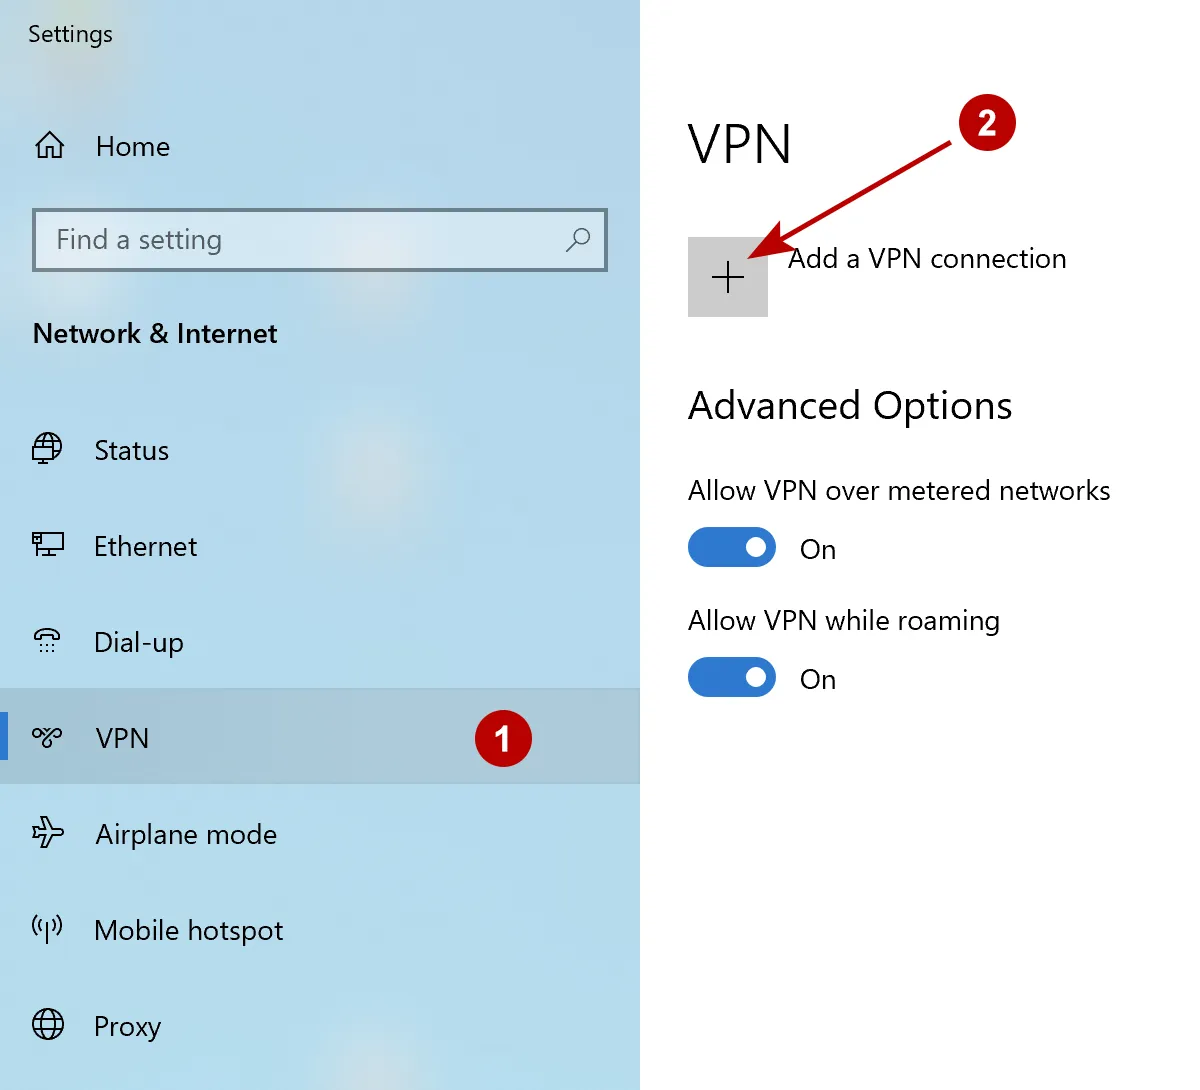 Add a VPN connection on Windows 10